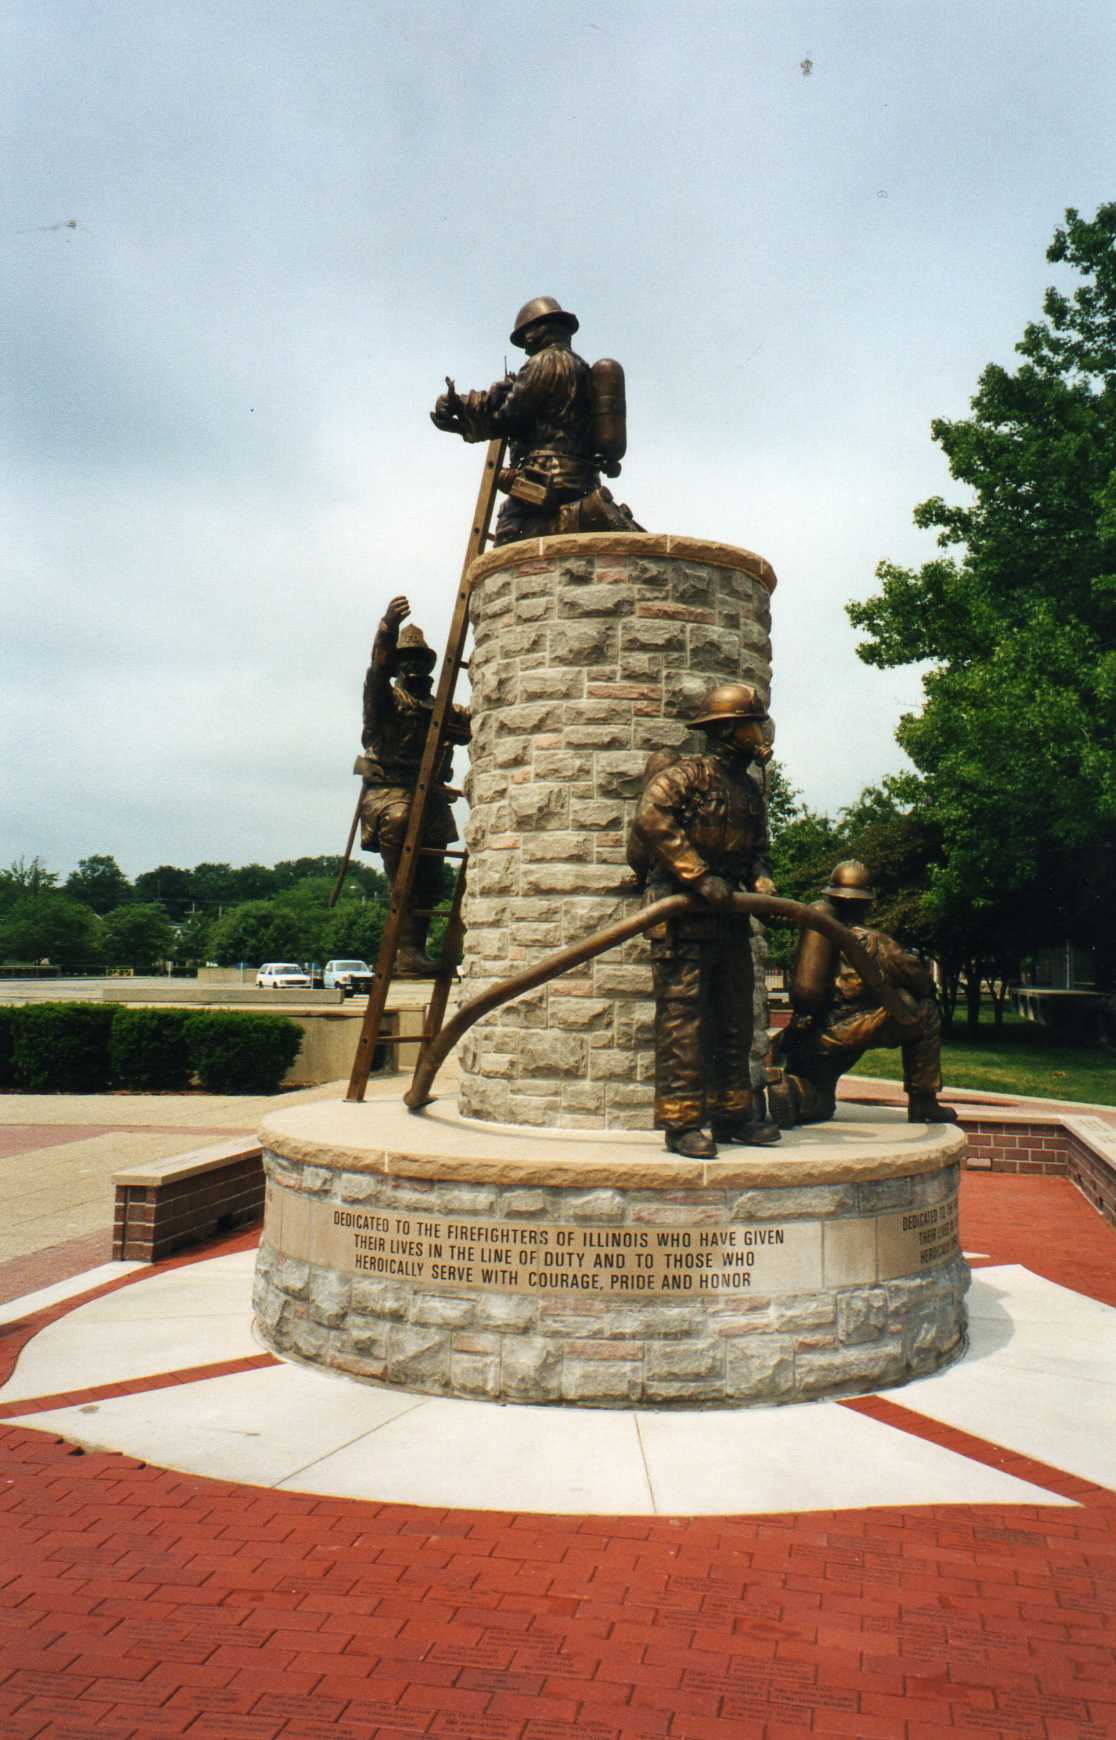 Bronze firefighter in uniform with hose, ladder child statues